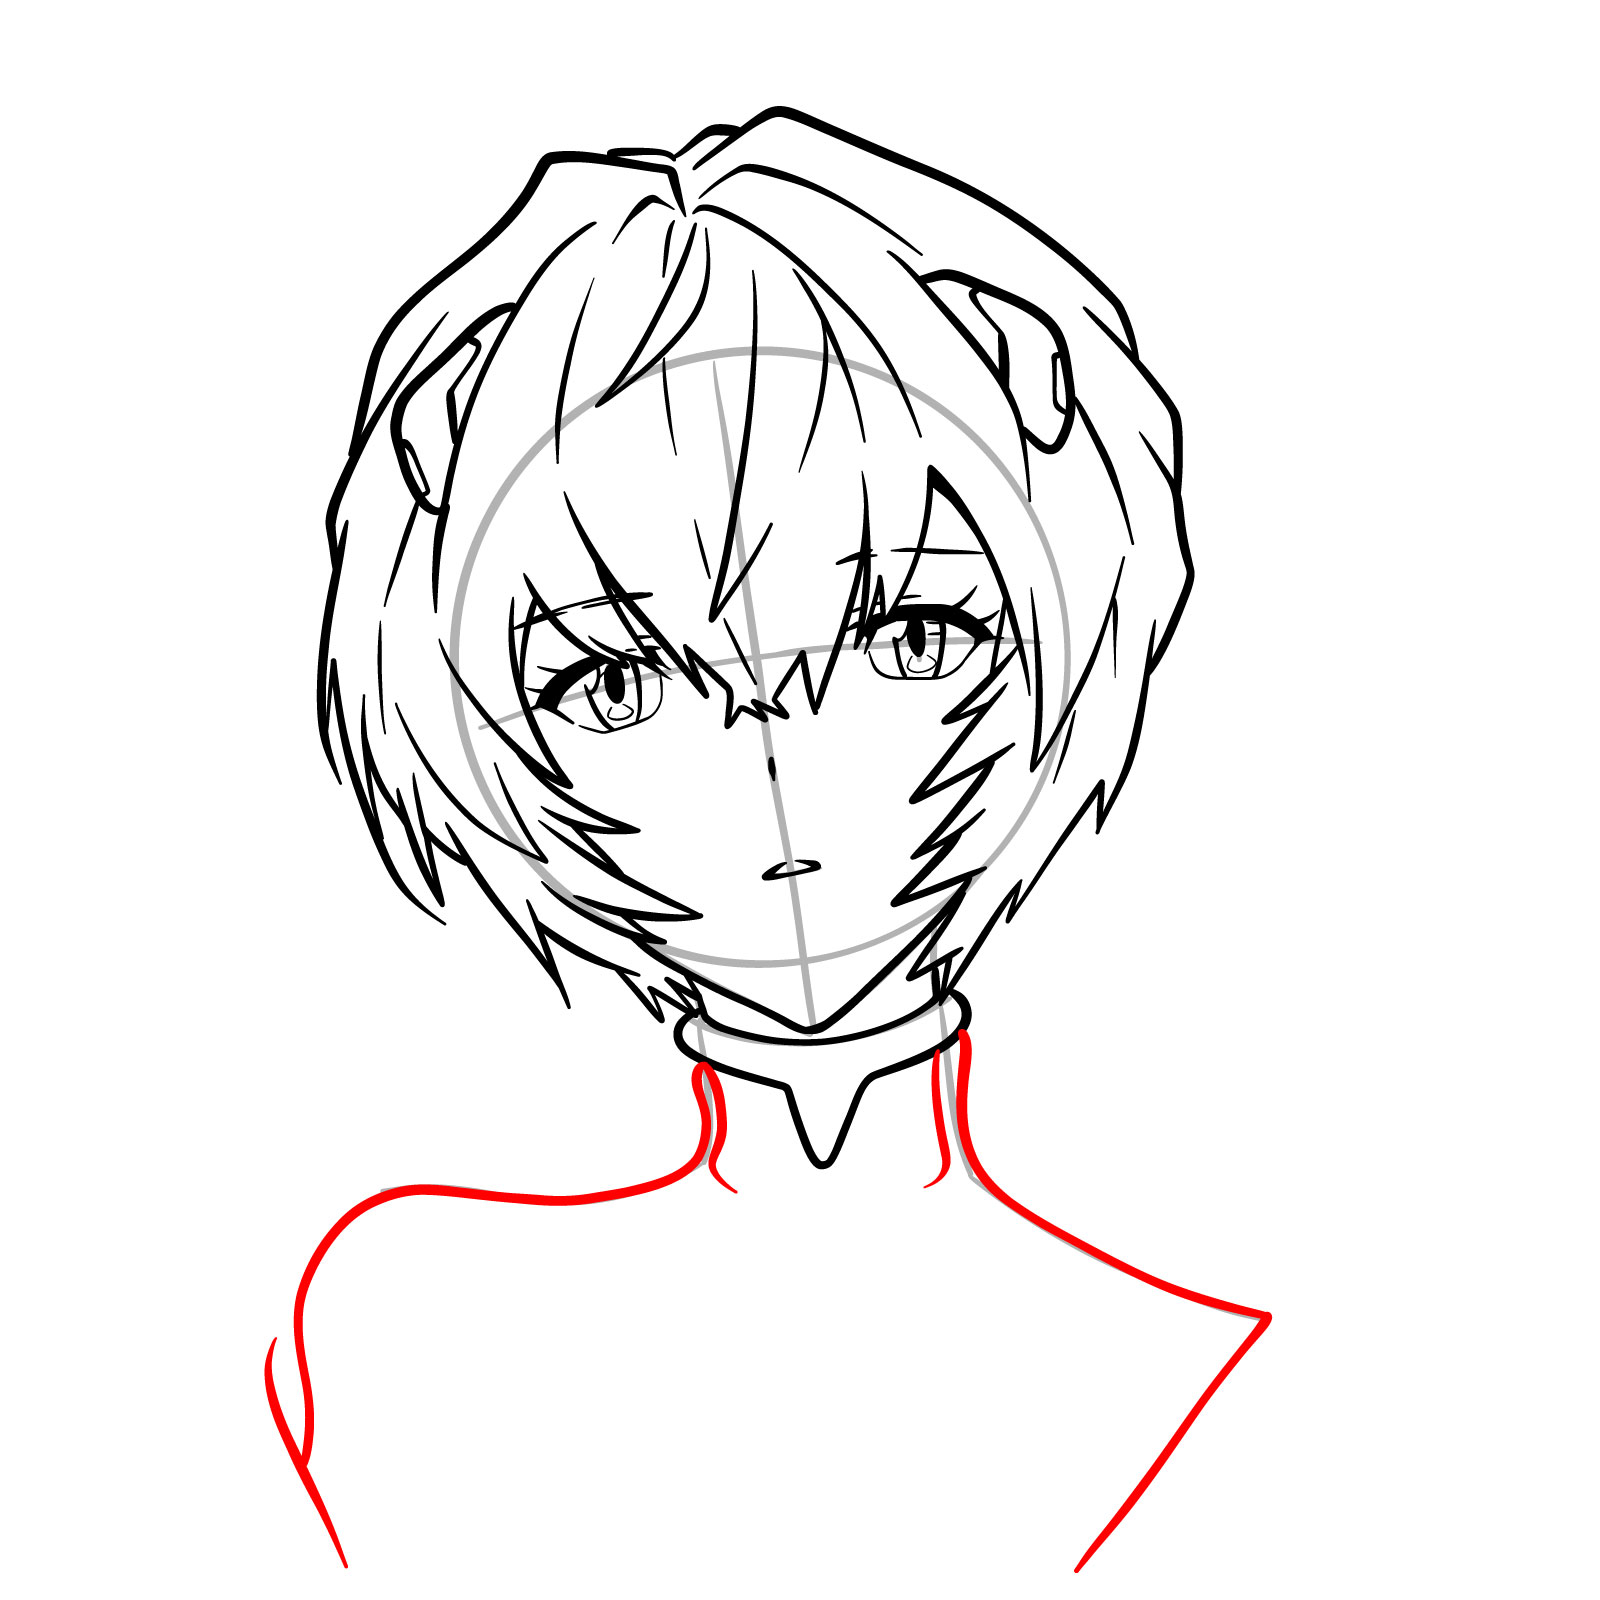 How to draw Rei Ayanami's face - Evangelion - step 18